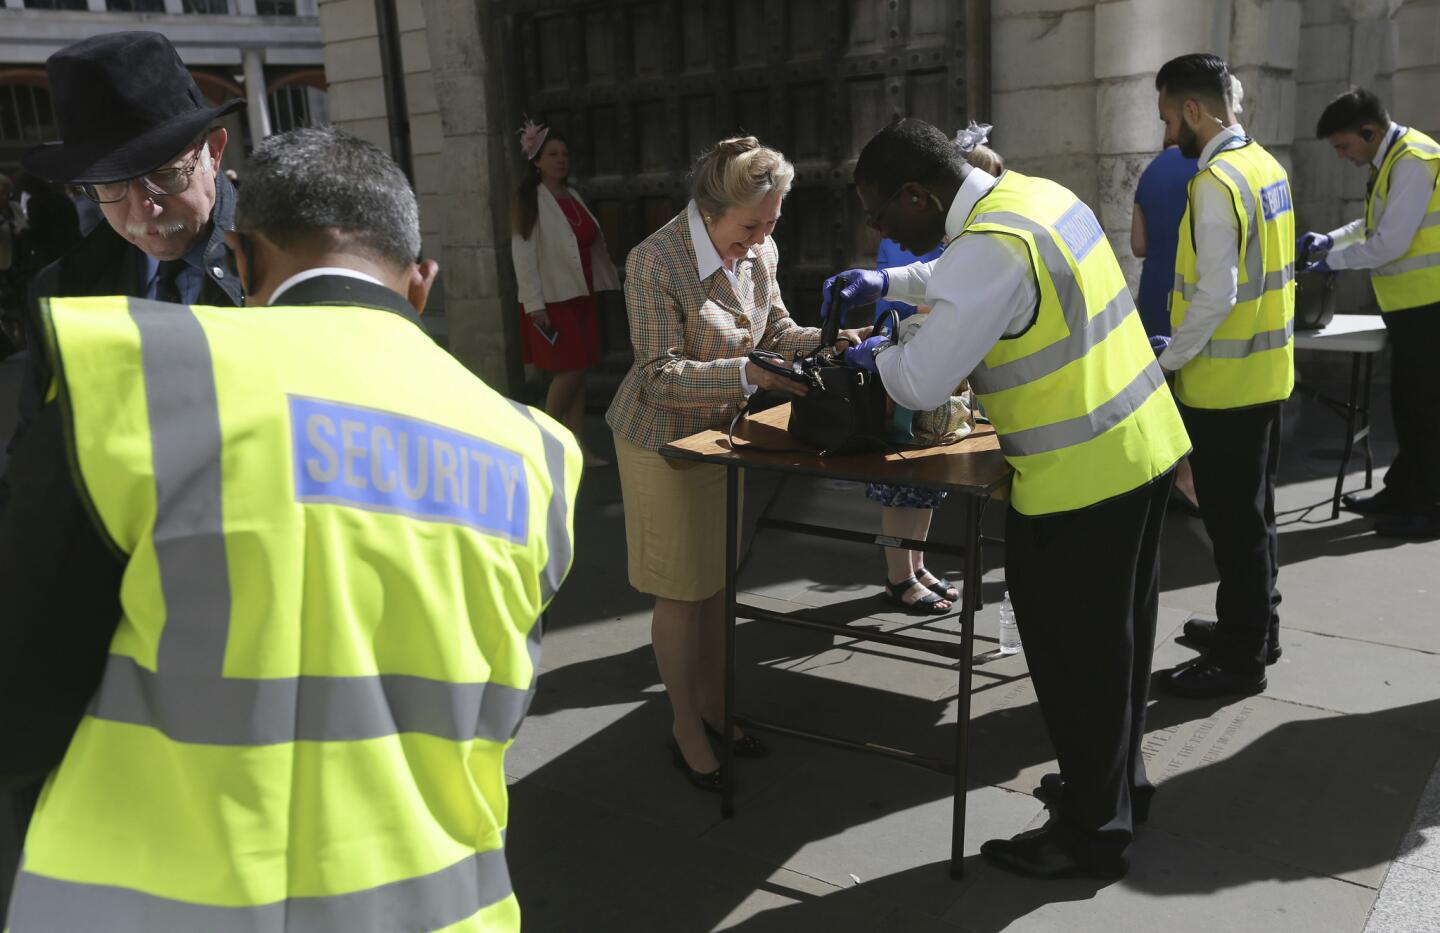 People have their bags searched outside St. Paul's Cathedral in London on May 24, 2017, ahead of a service to mark the 100th anniversary of the Order of the British Empire. Armed troops were at vital locations after the official threat level was raised to its highest point following a suicide bombing that killed 22 people.